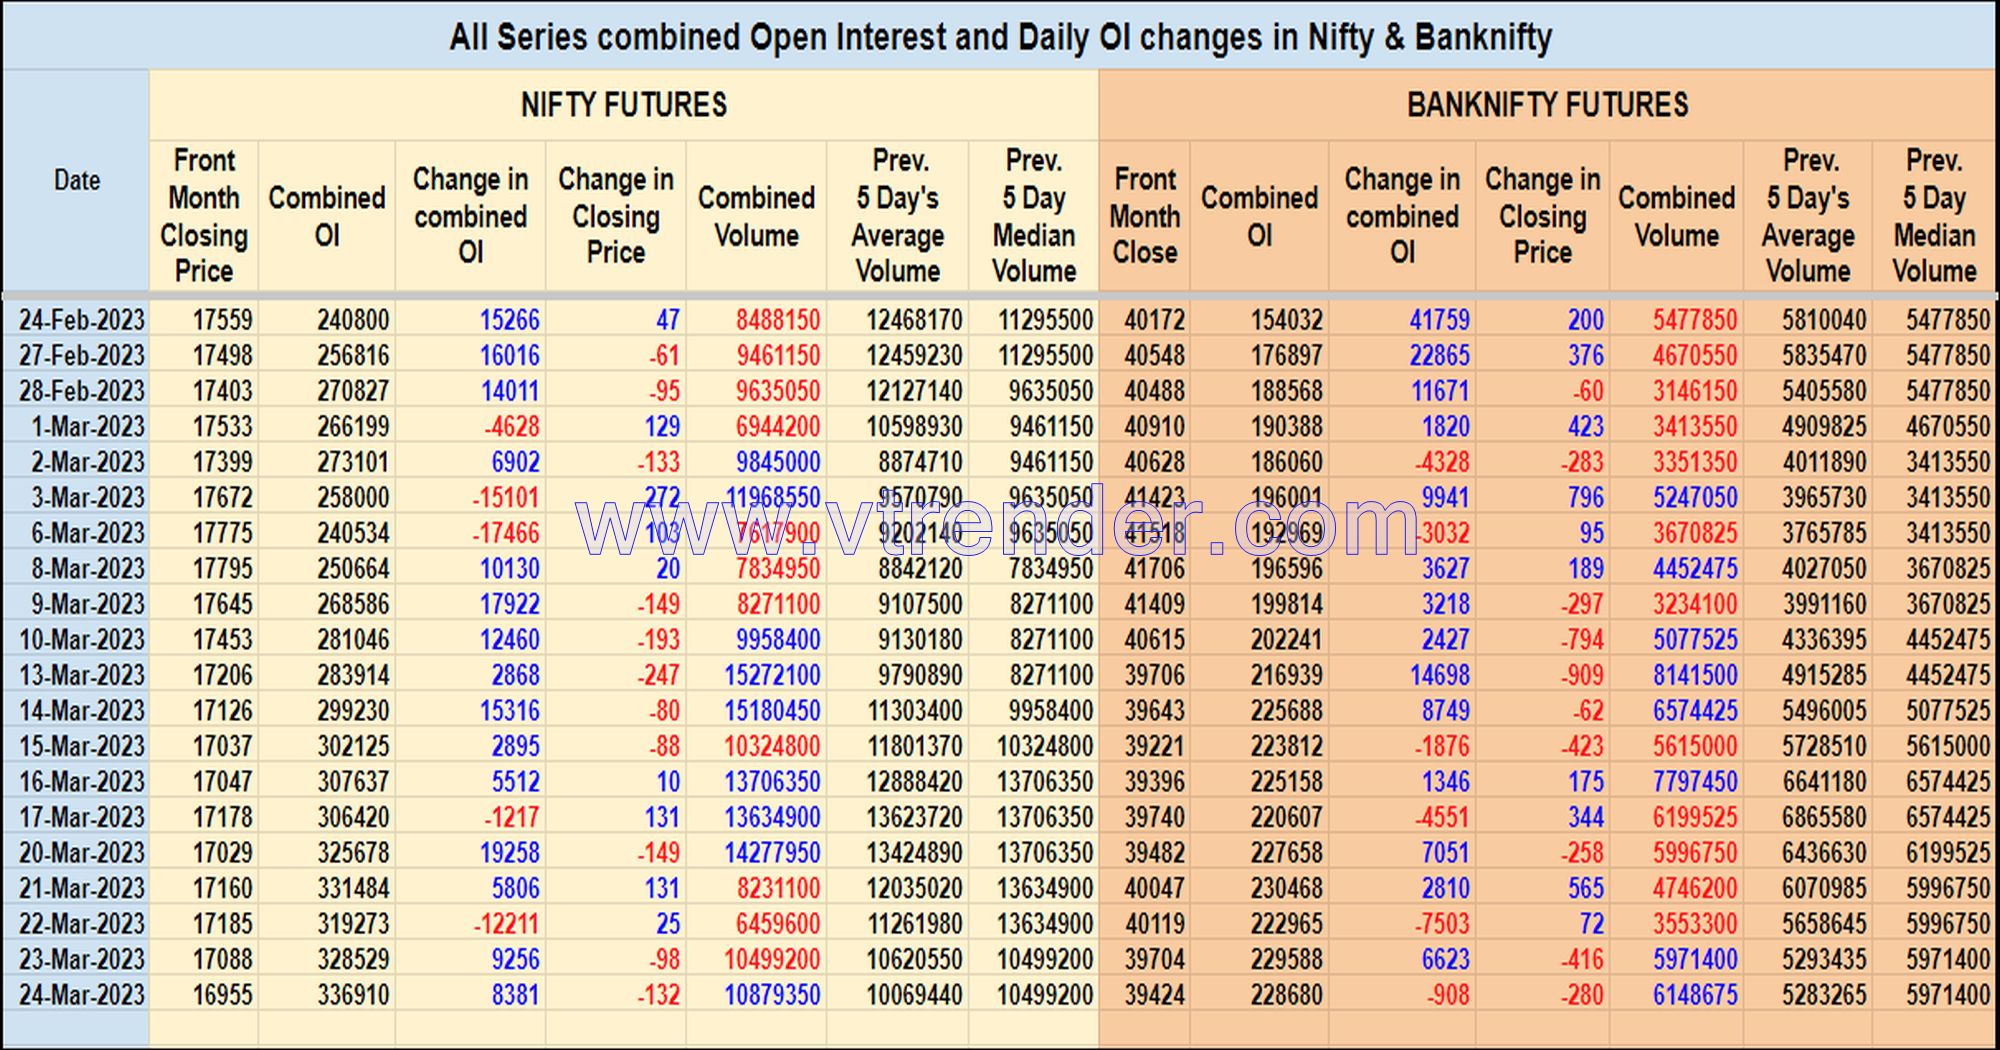 Oi24Mar Nifty And Banknifty Futures With All Series Combined Open Interest – 24Th Mar 2023 Banknifty, Nifty, Open Interest